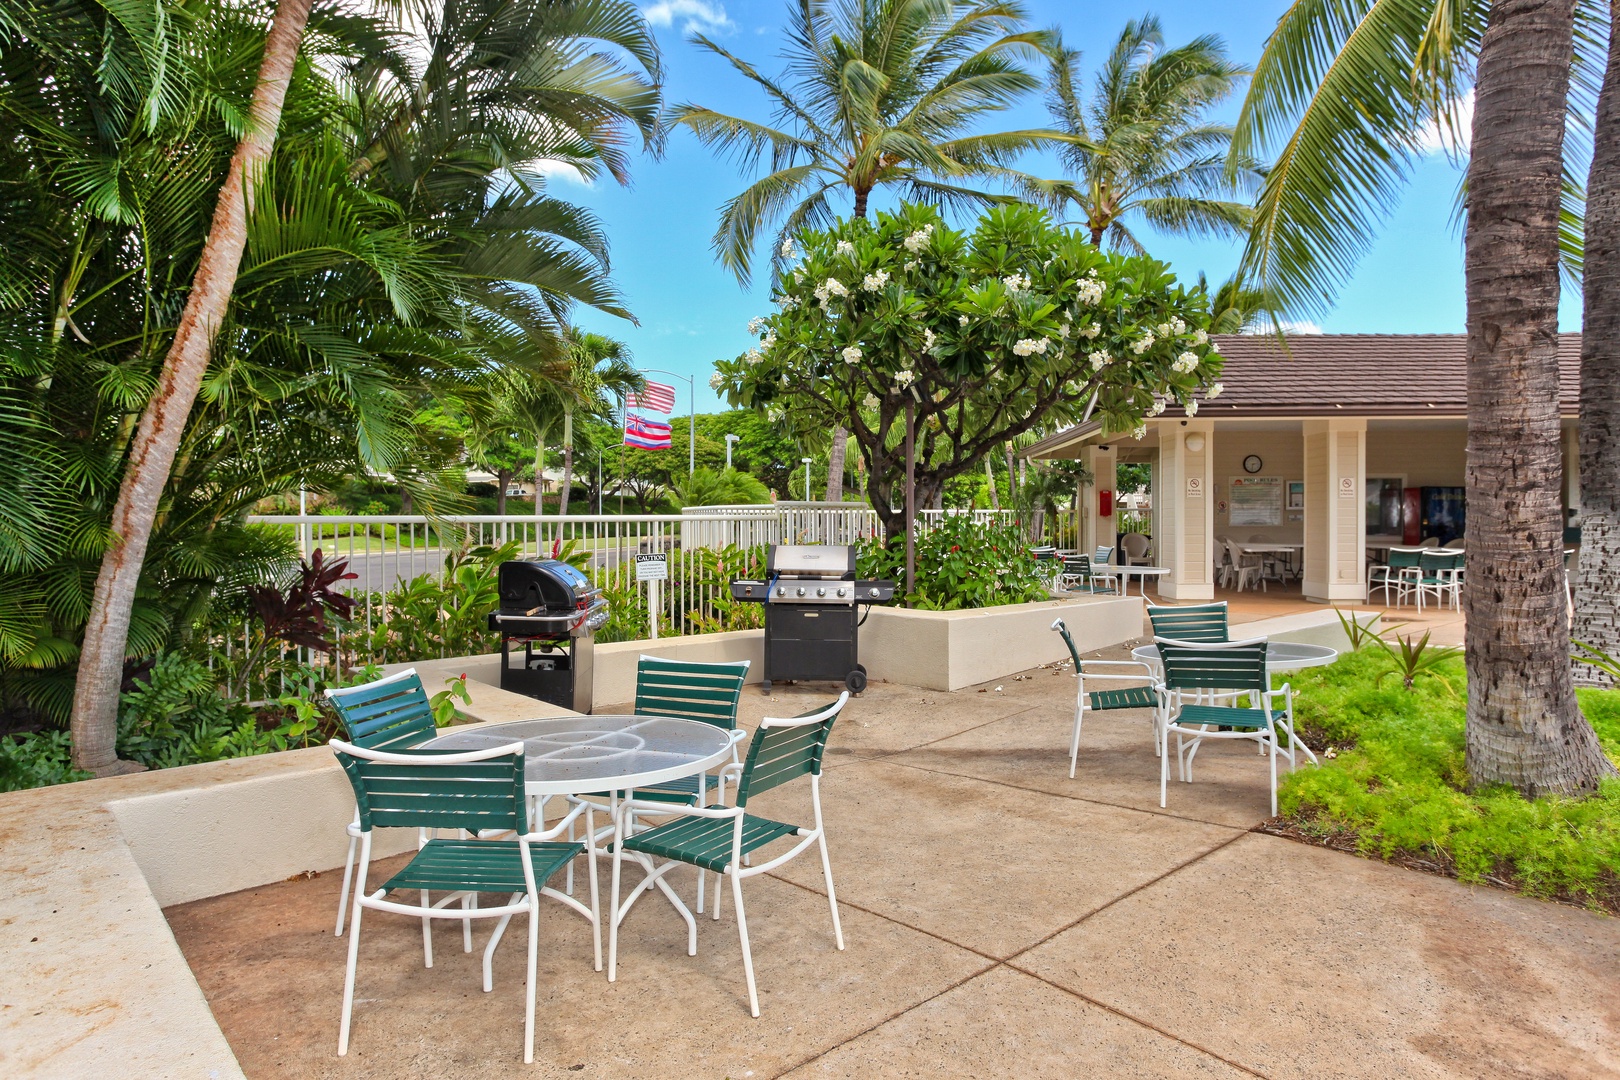 Kapolei Vacation Rentals, Fairways at Ko Olina 18C - Patio seating and BBQ grills near the pool in the Fairways at the charming Ko Olina community..